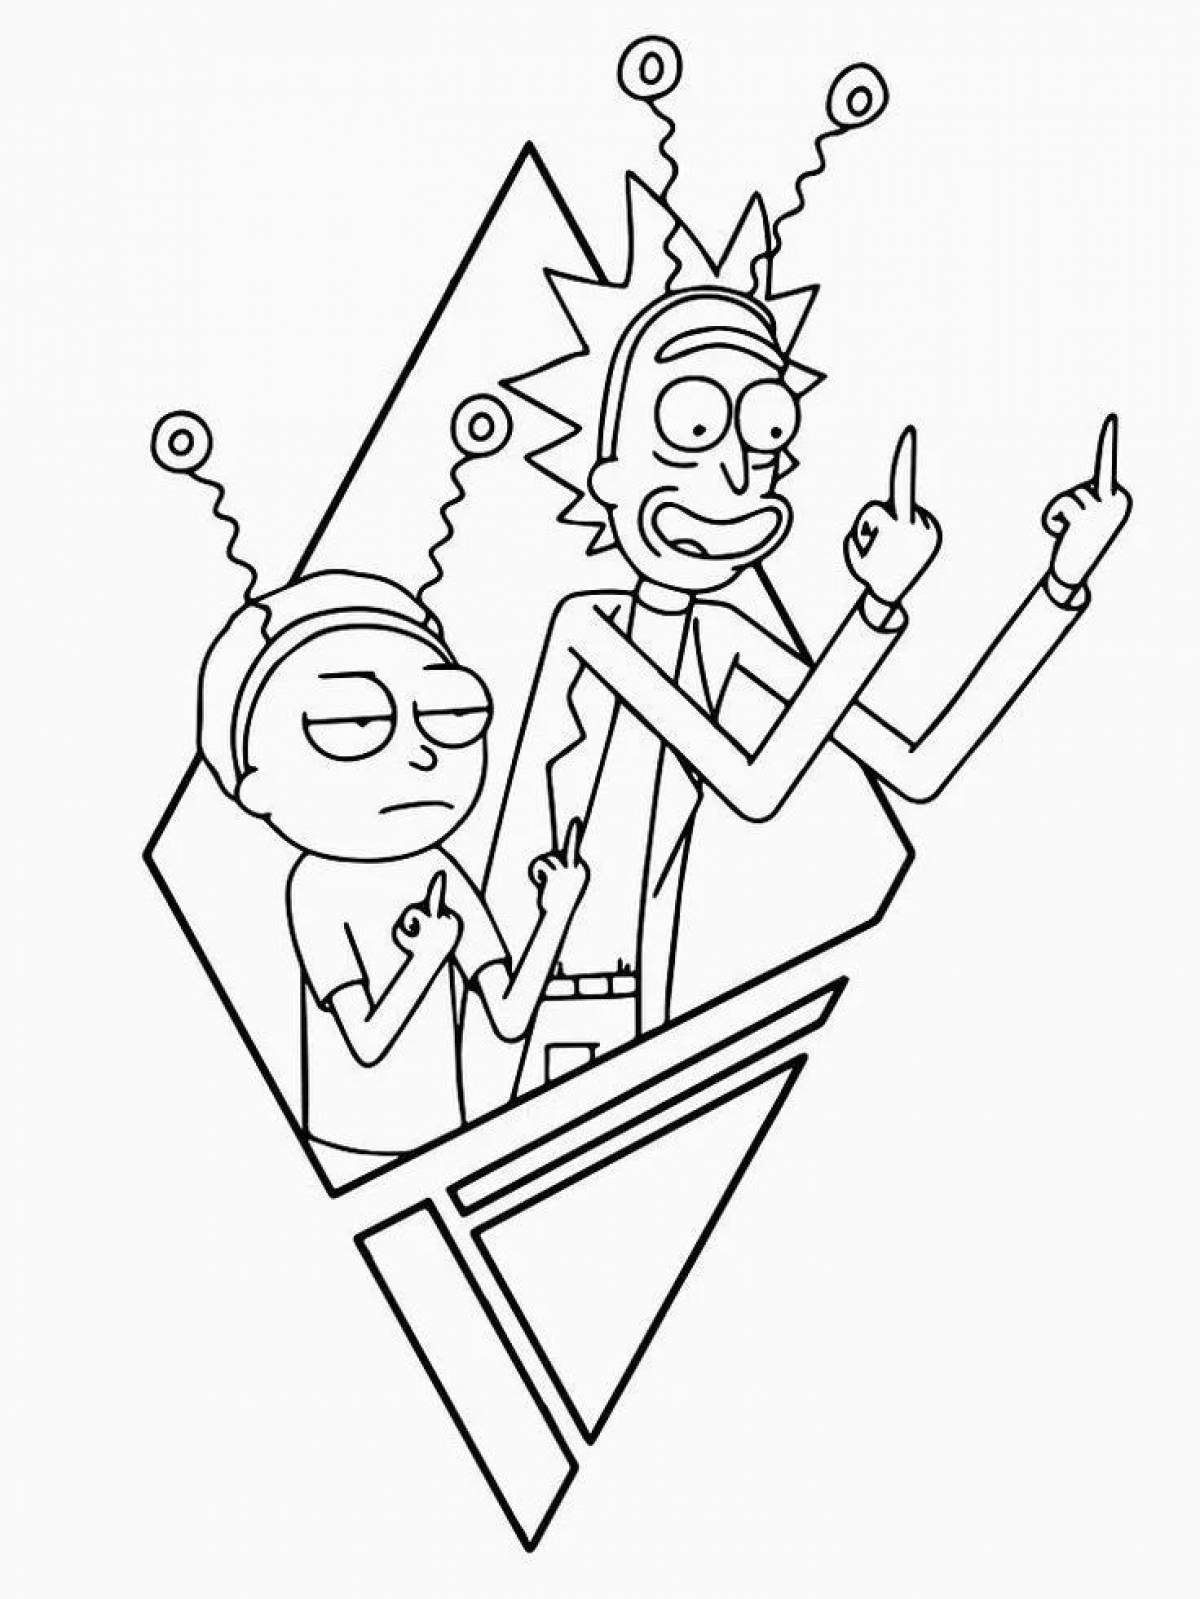 Rick and morty picture